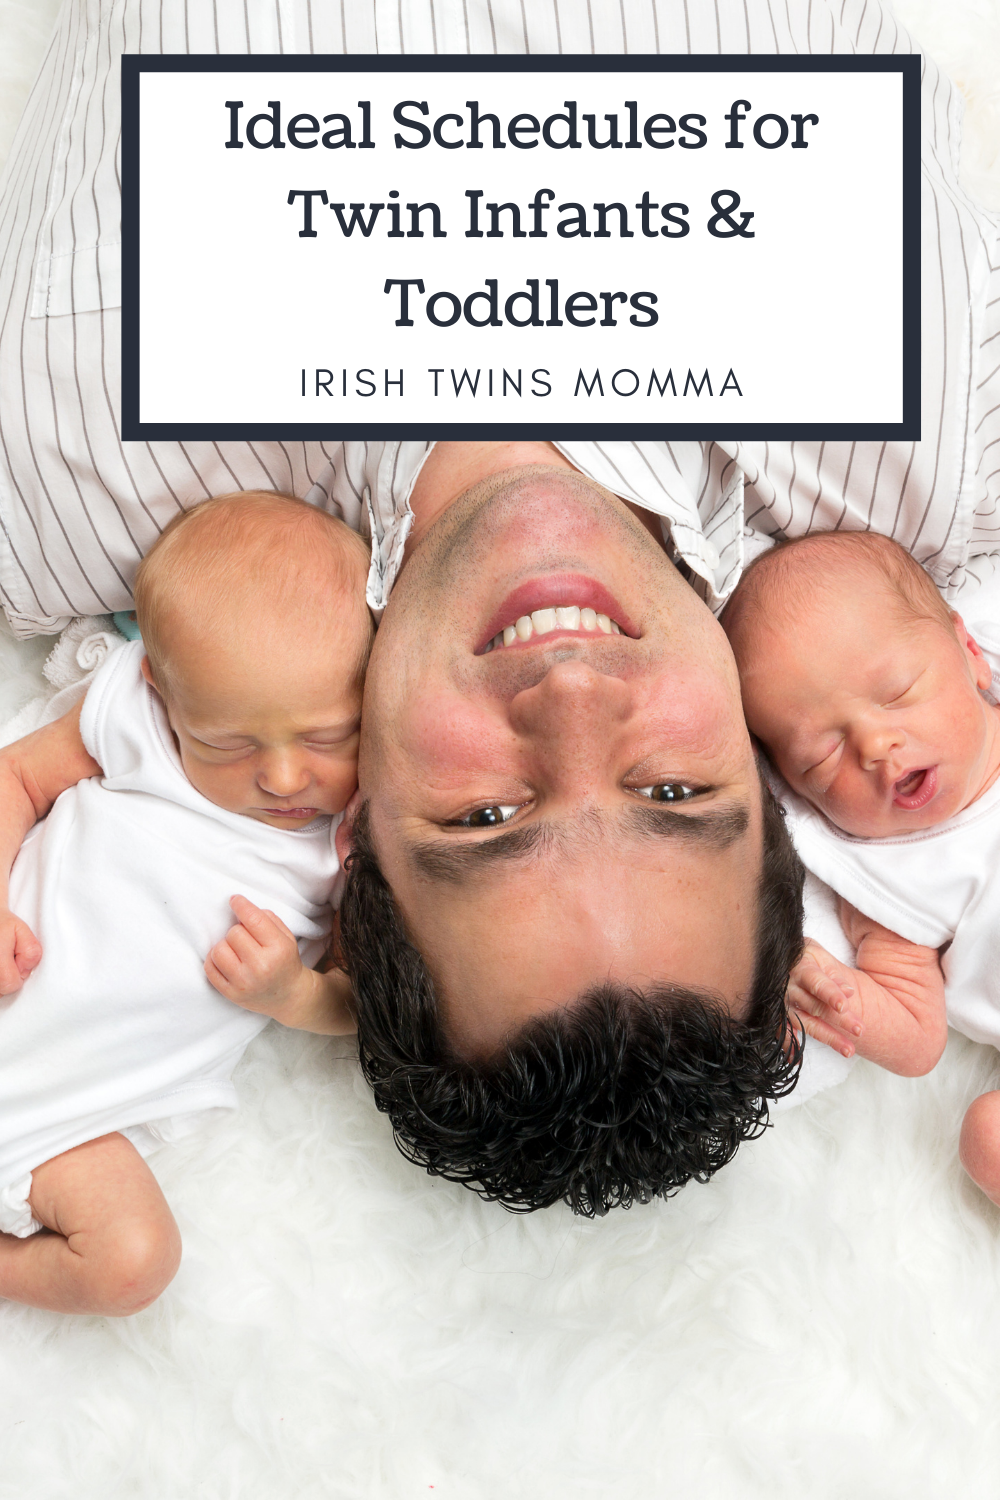 Ideal Schedules for Twin Infants & Toddlers